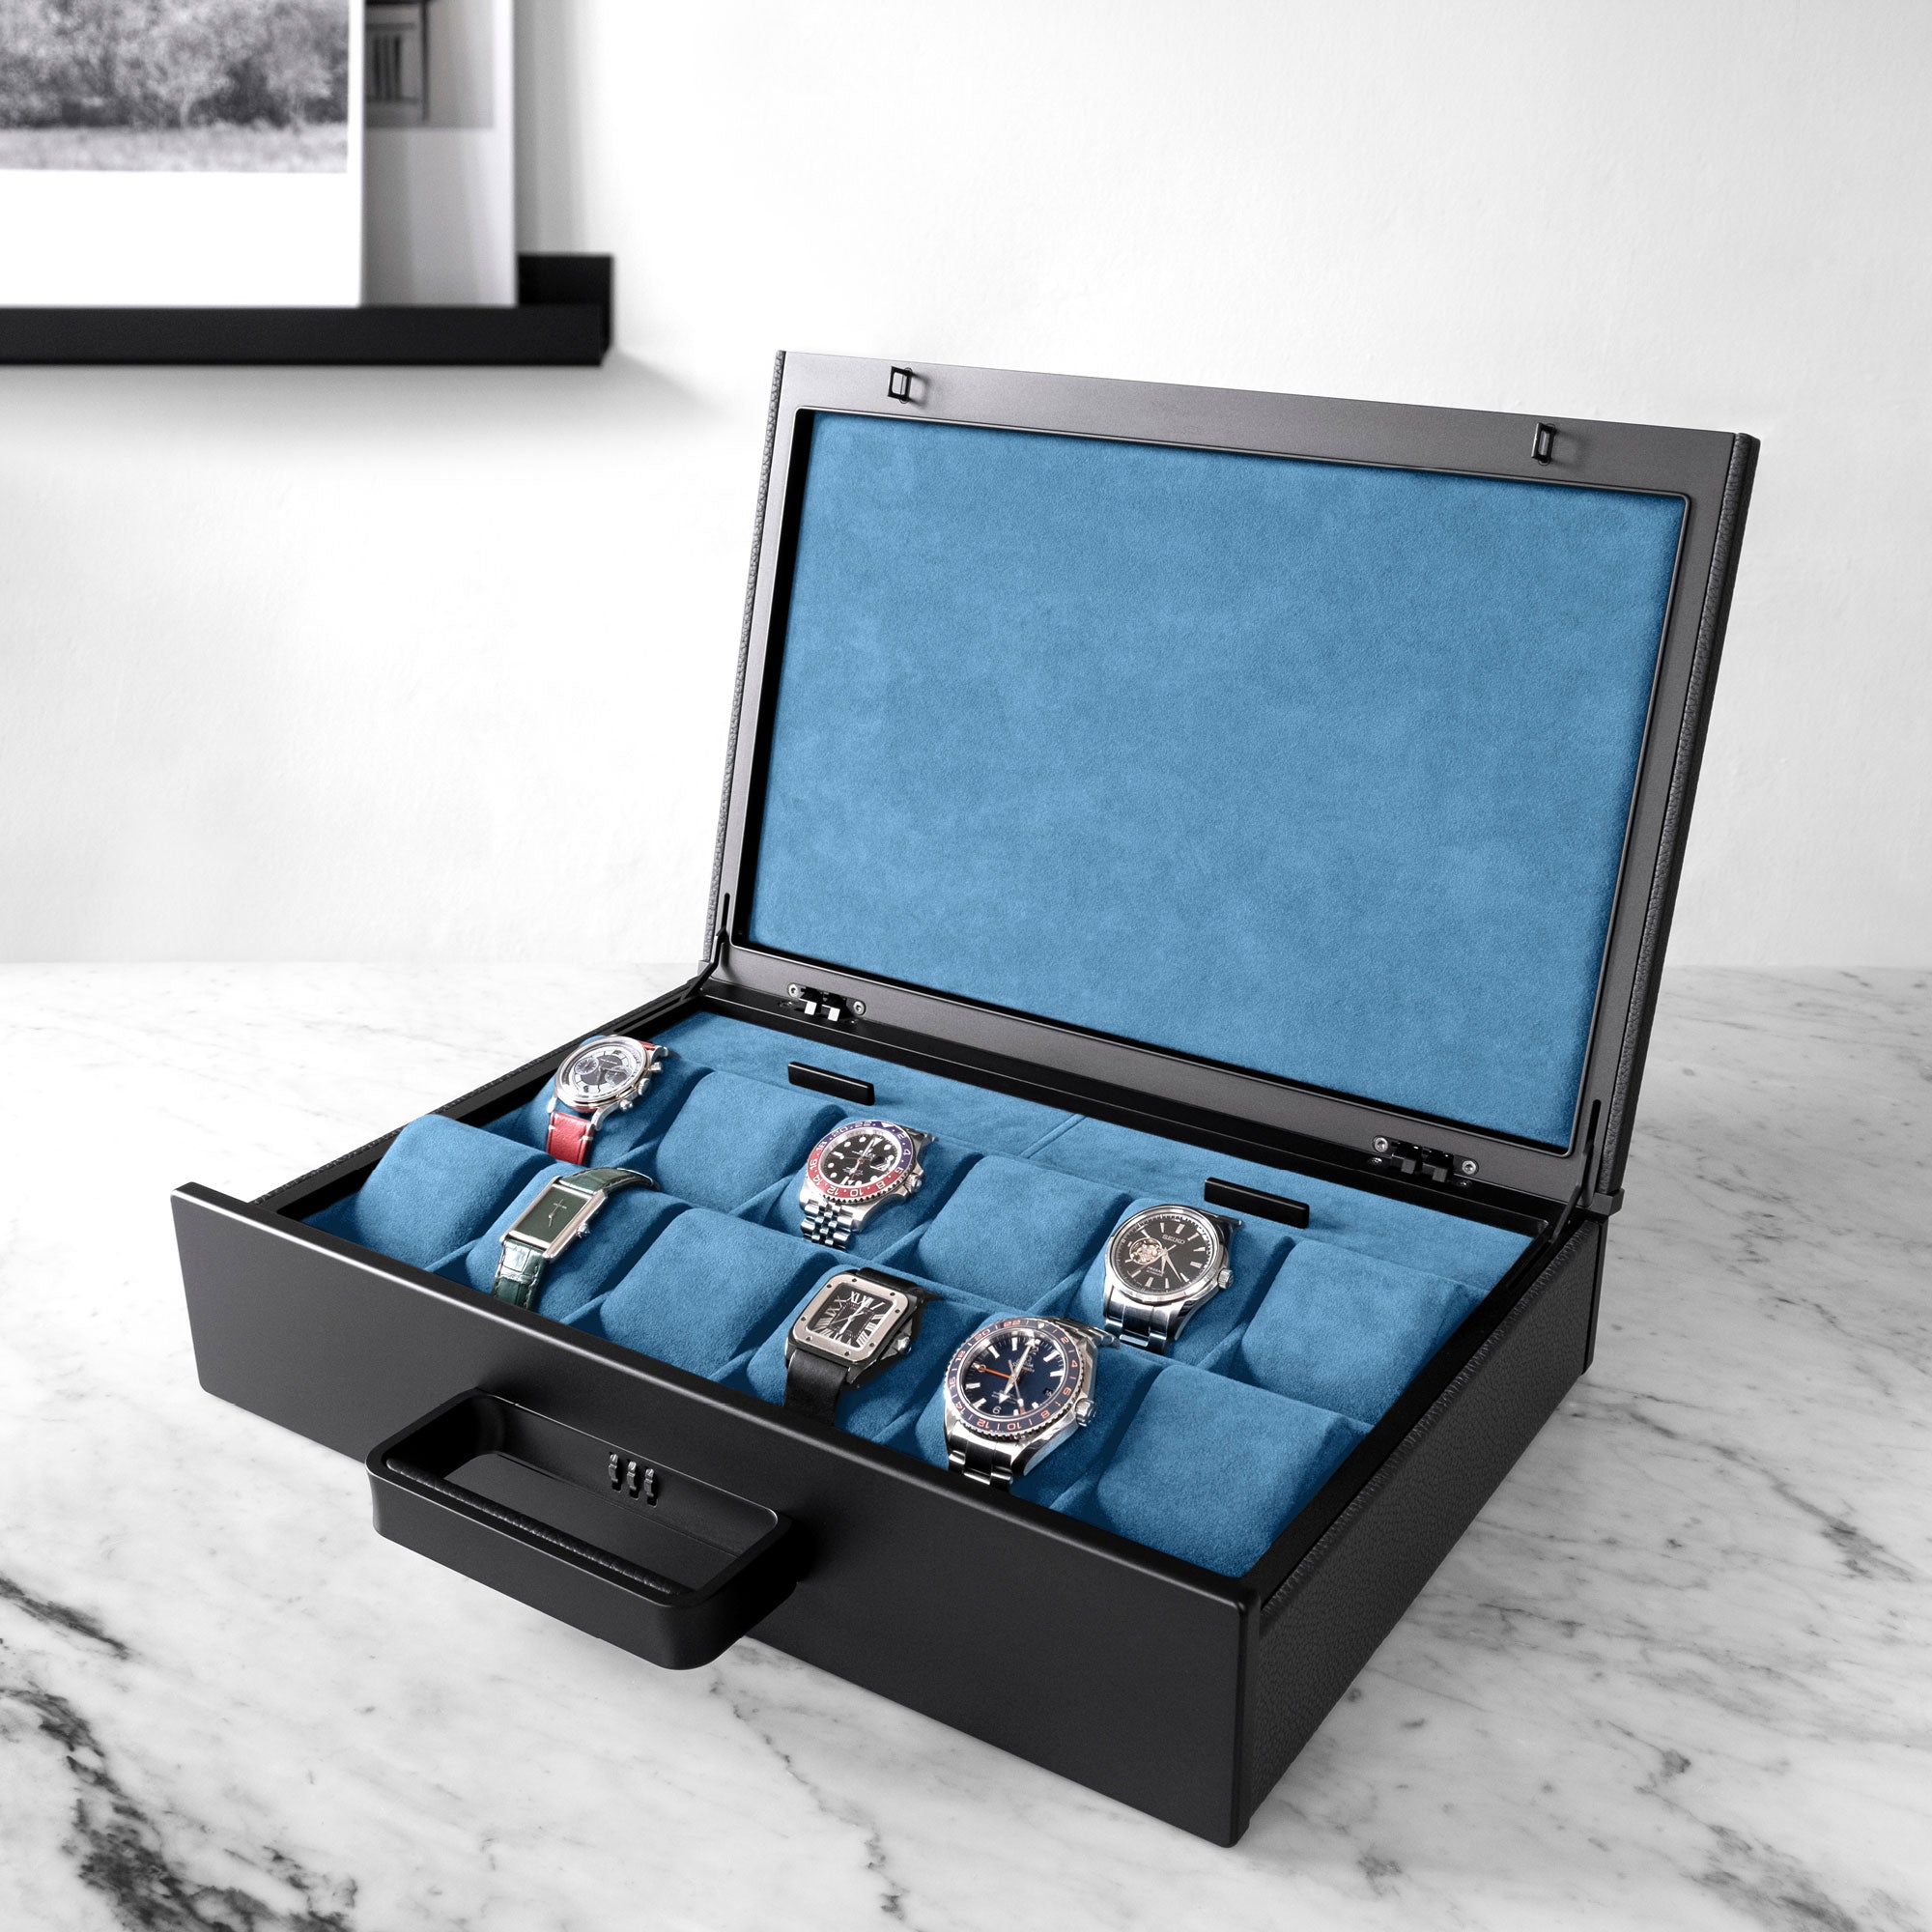 Designer watch briefcase in black leather, black carbon fiber and anodized aluminum and cyan blue Alcantara interior holding luxury watches